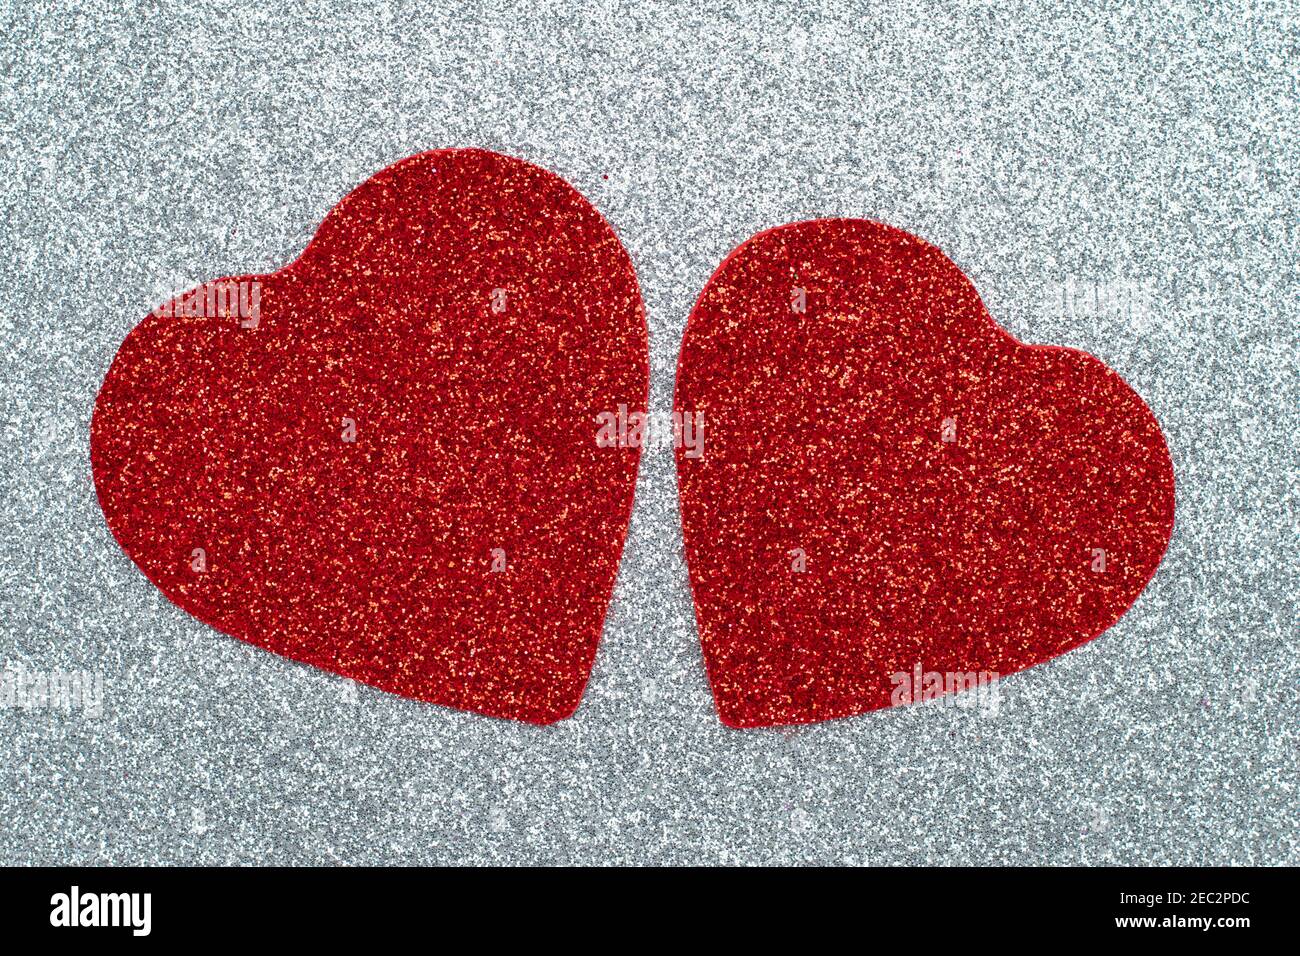 Two carved red hearts on a gray glossy background. Abstract shiny pattern. Craft paper, glitter, sparkling texture. Love concept Stock Photo